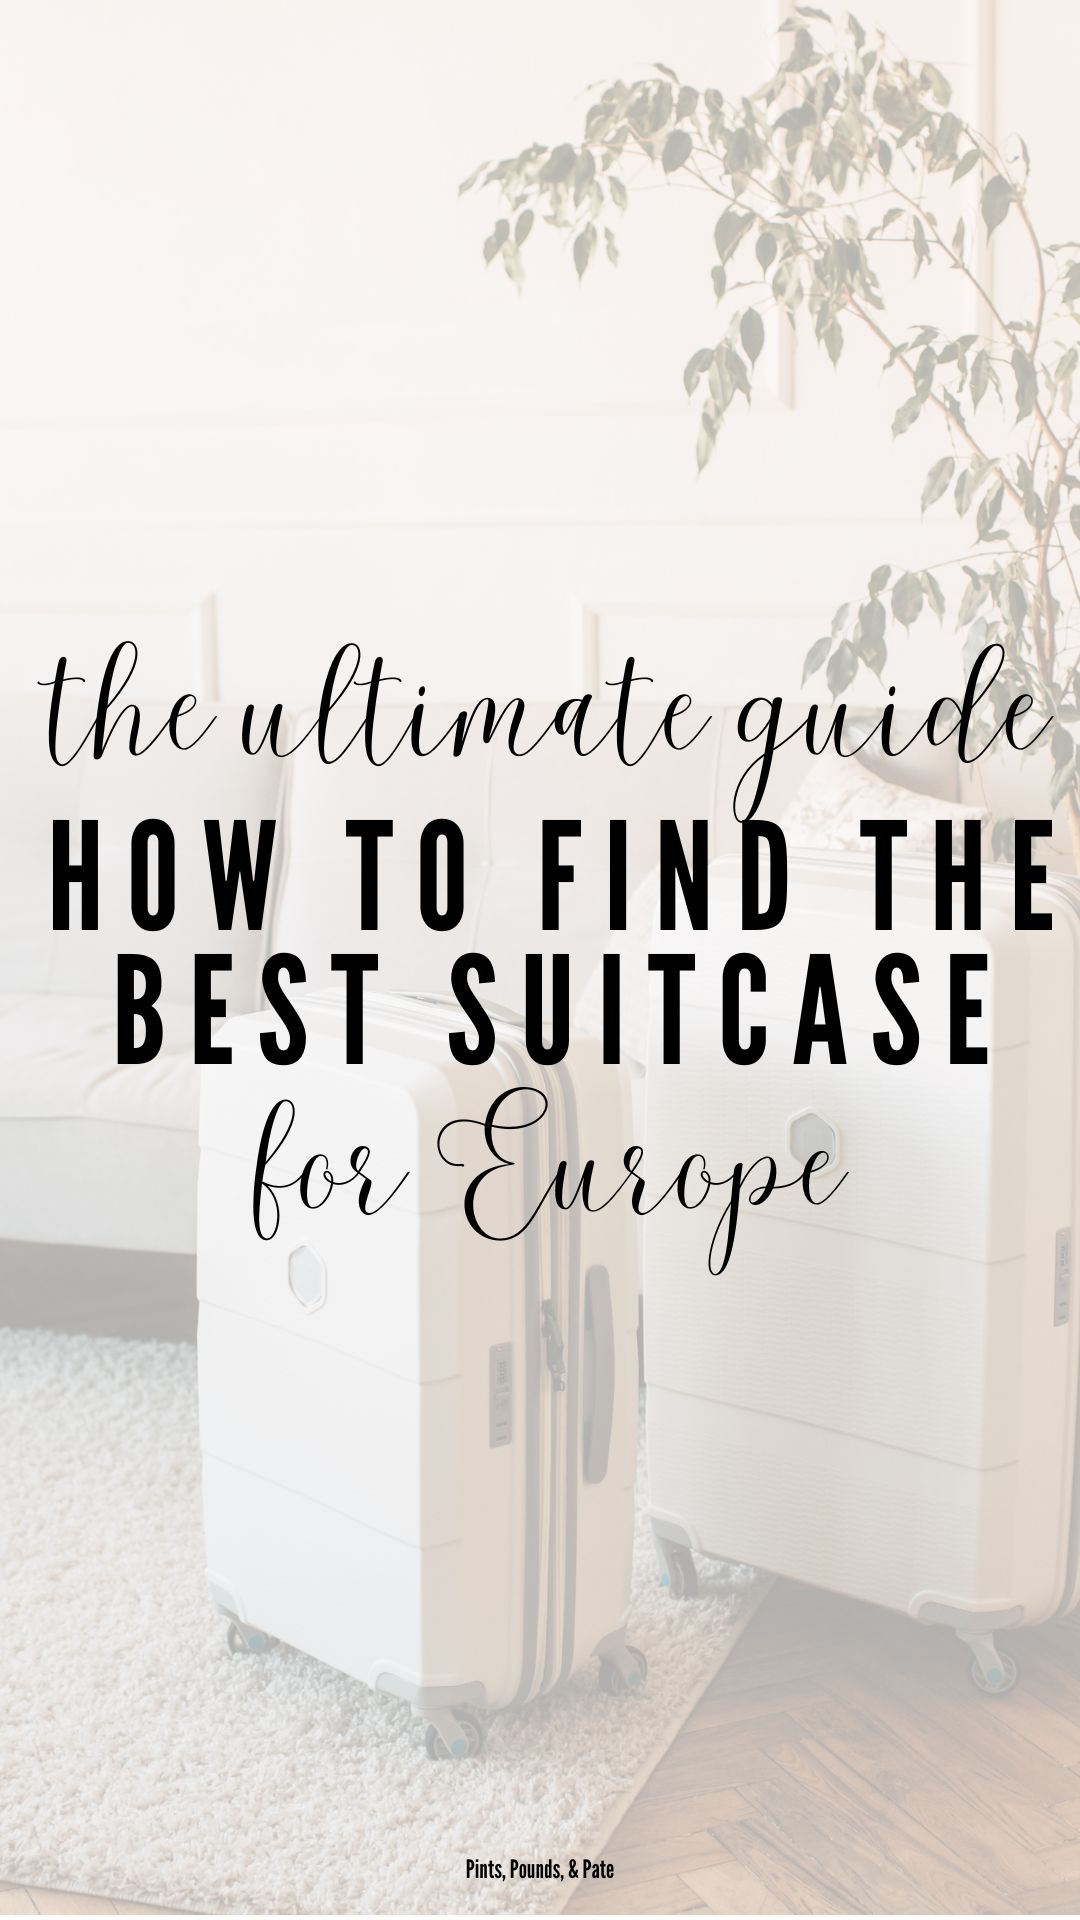 Best Suitcase for Europe Travel